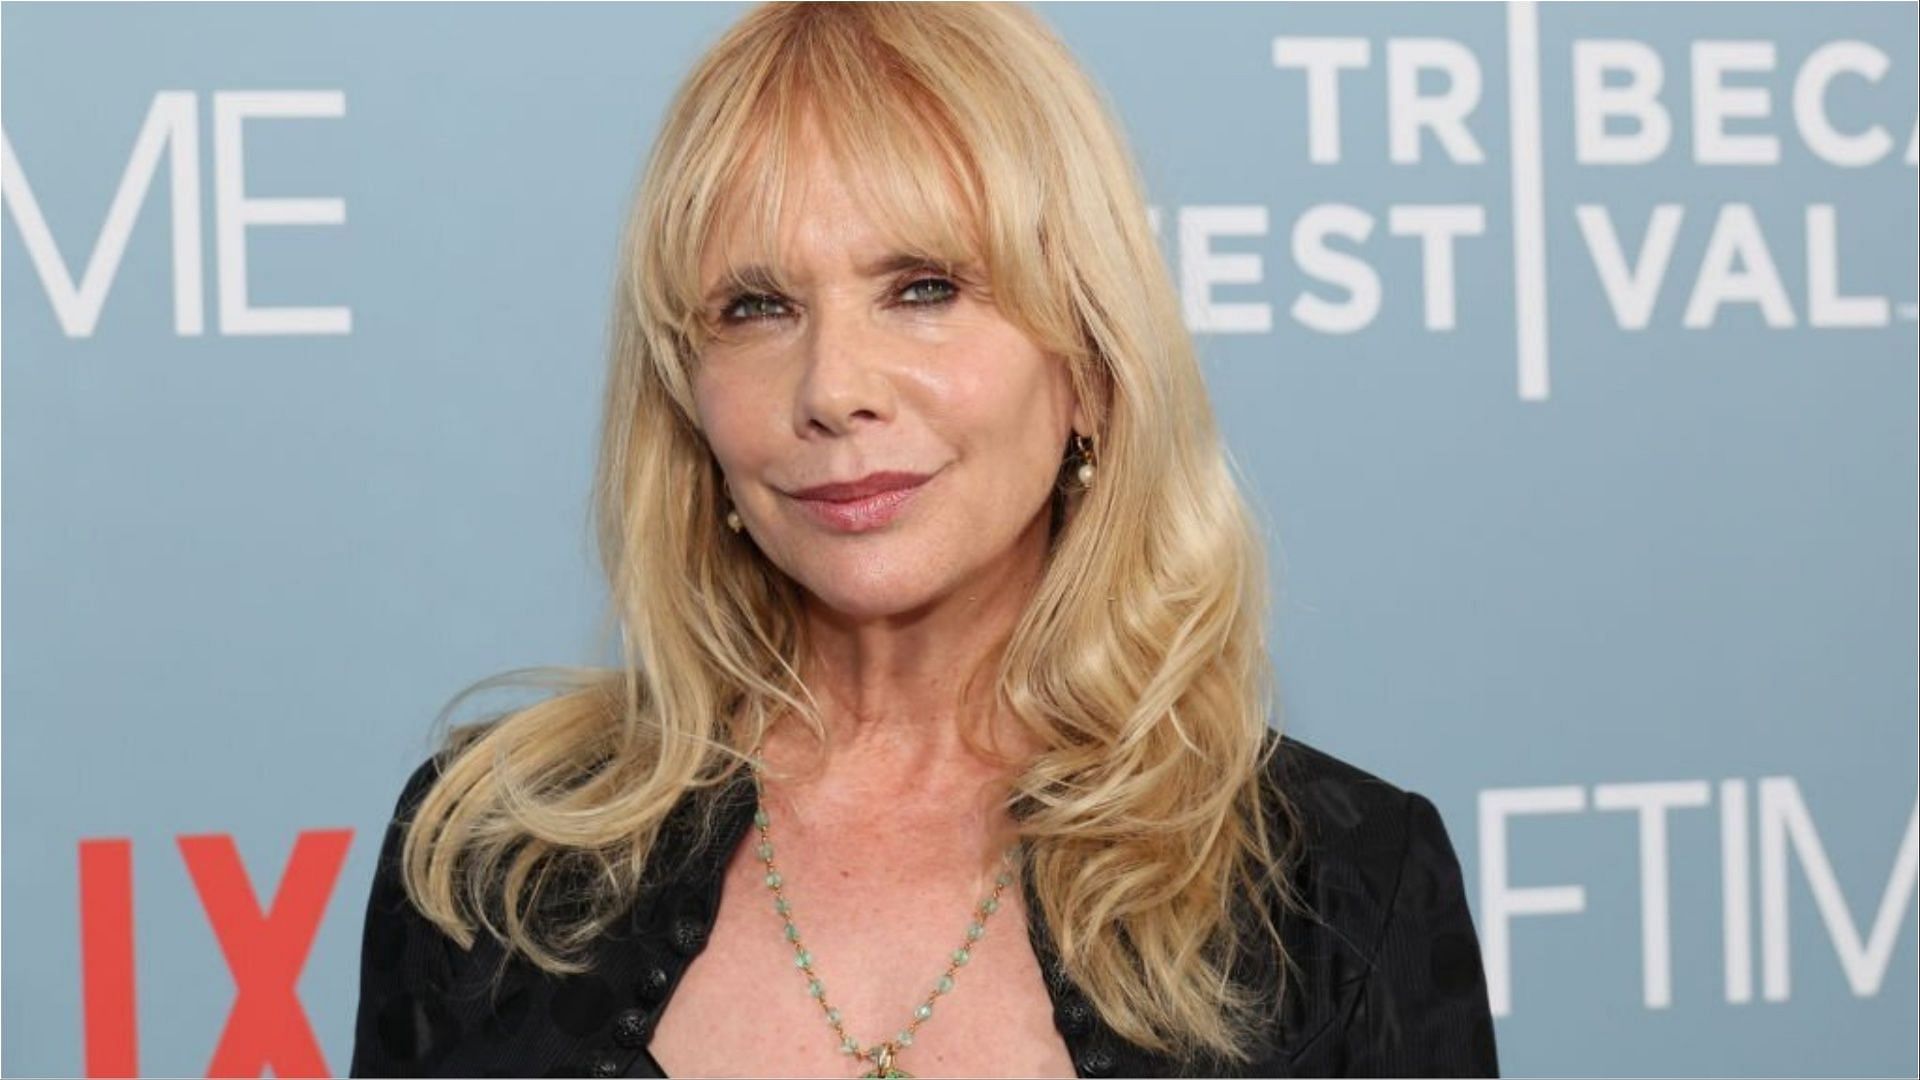 Rosanna Arquette has accumulated a lot of wealth from her acting career (Image via Dia Dipasupil/Getty Images)